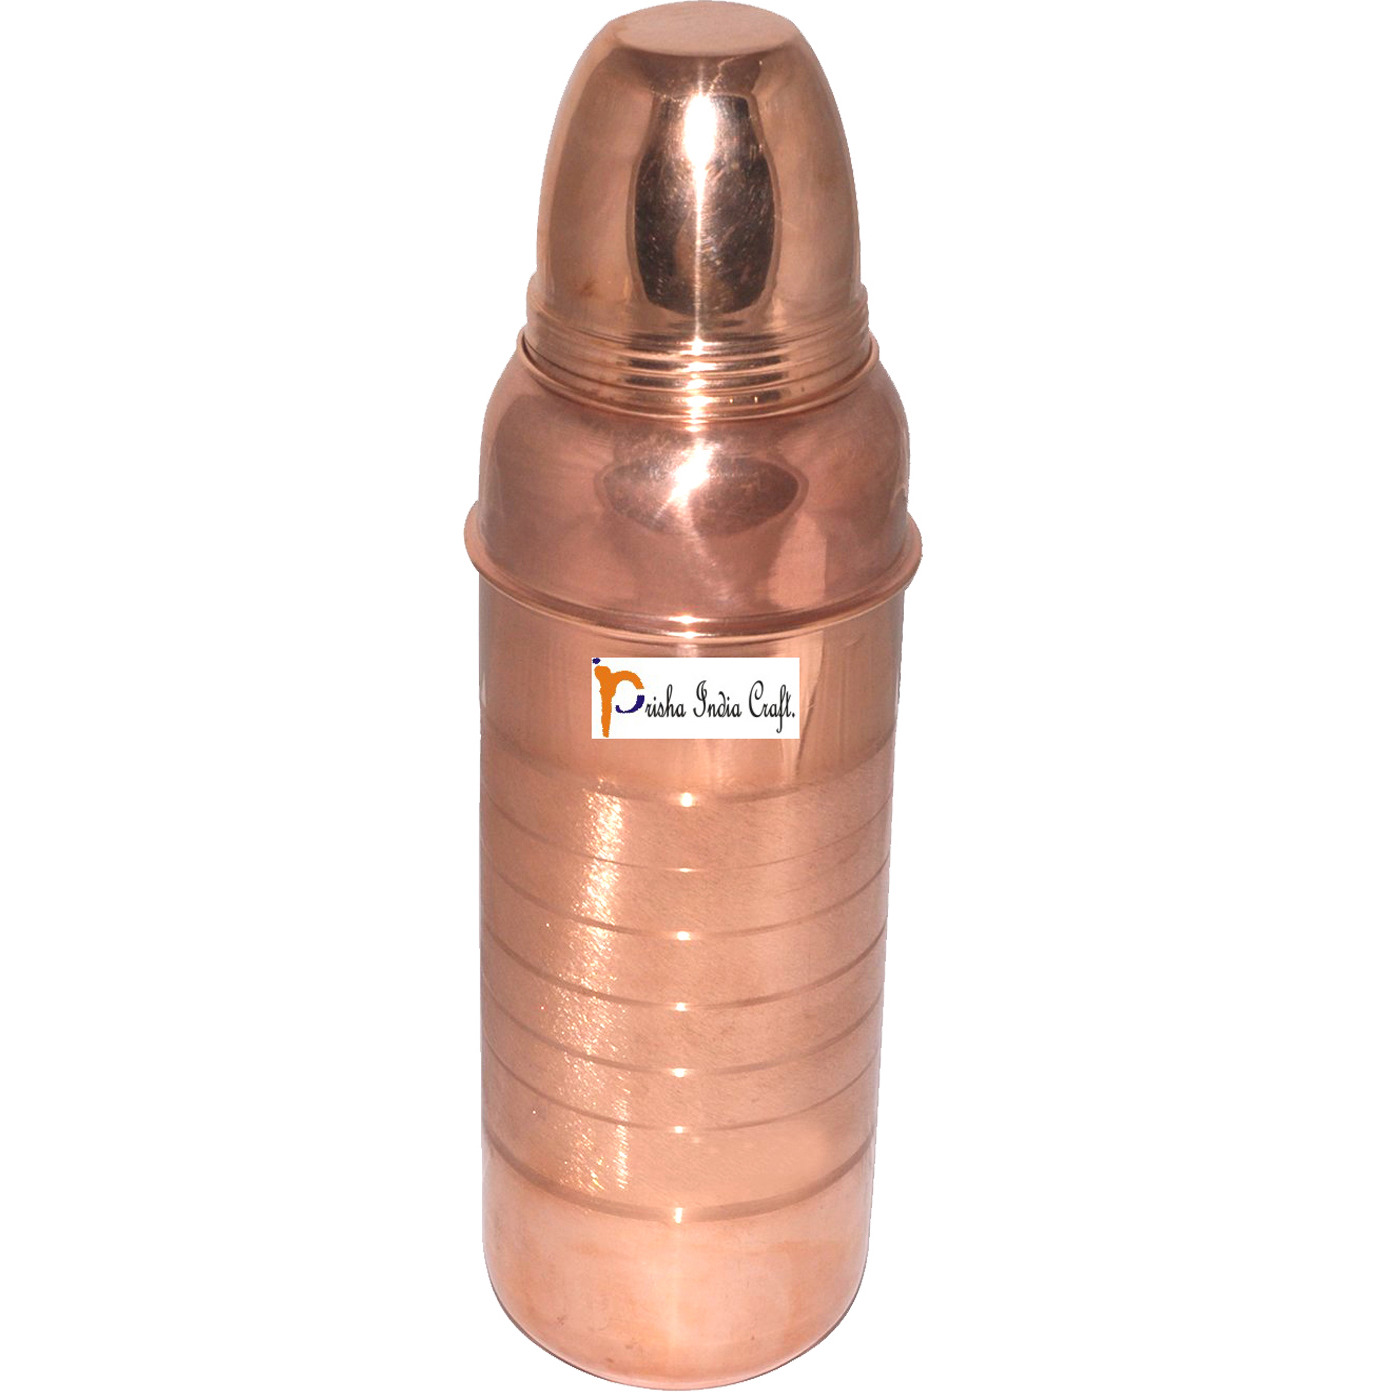 Prisha India Craft B. 800 ML Pure Copper Water Bottle New Design Copper Water Pitcher for the Refrigerator - Sports water Bottles - Christmas Gift with Bottle Cleaning Brush